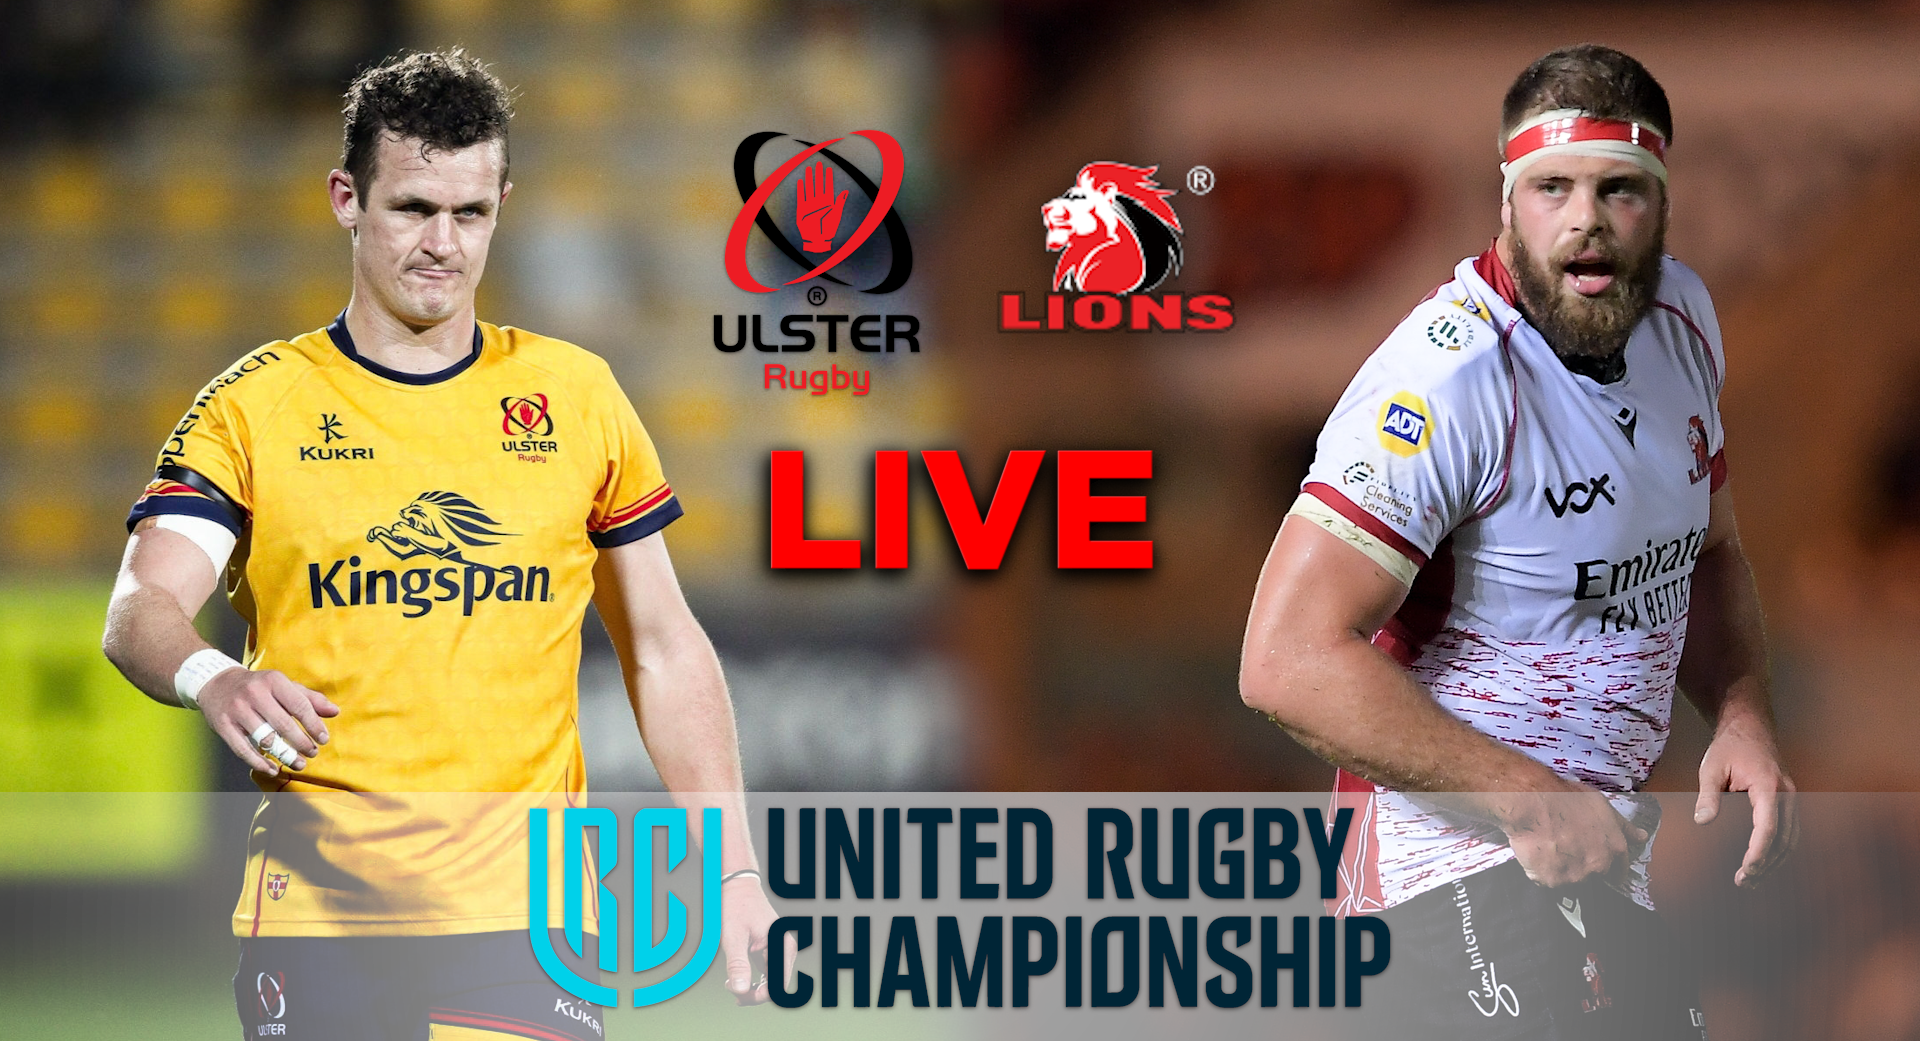 Ulster vs Lions